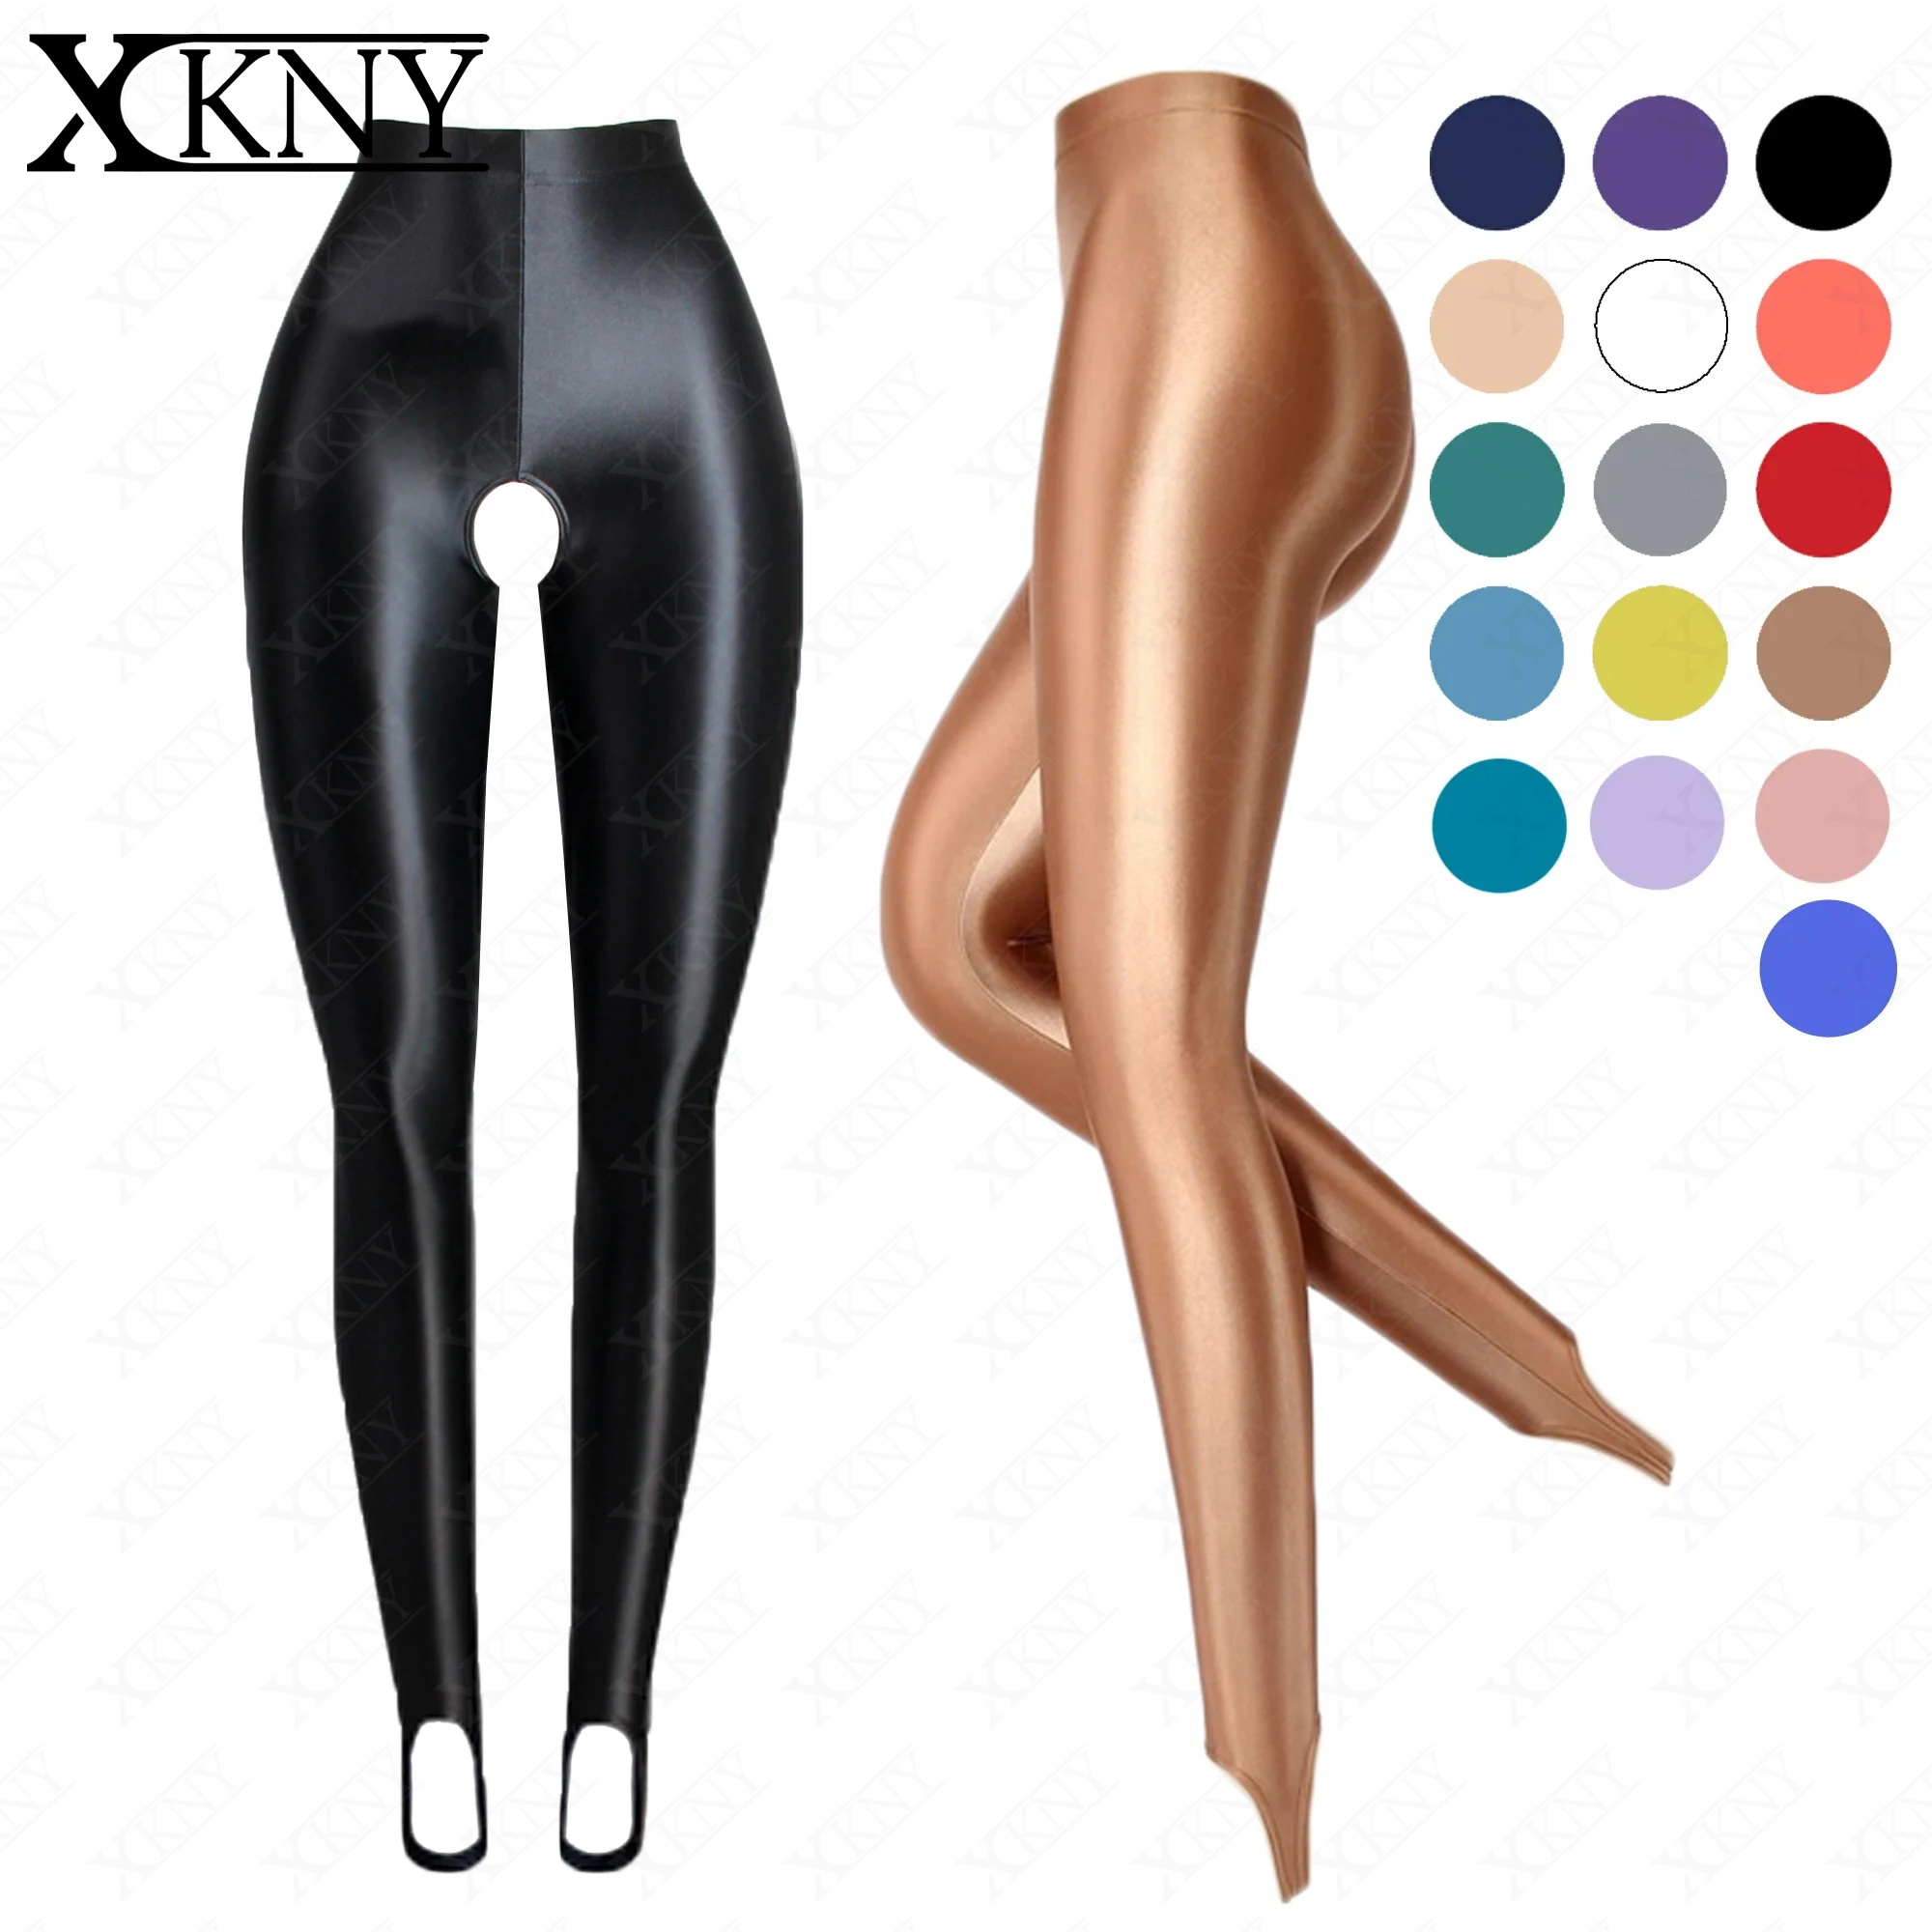 

XCKNY satin glossy Open crotch pants oil smooth opaque pantyhose wet look tights sexy stockings glossy slim high Pedal pants